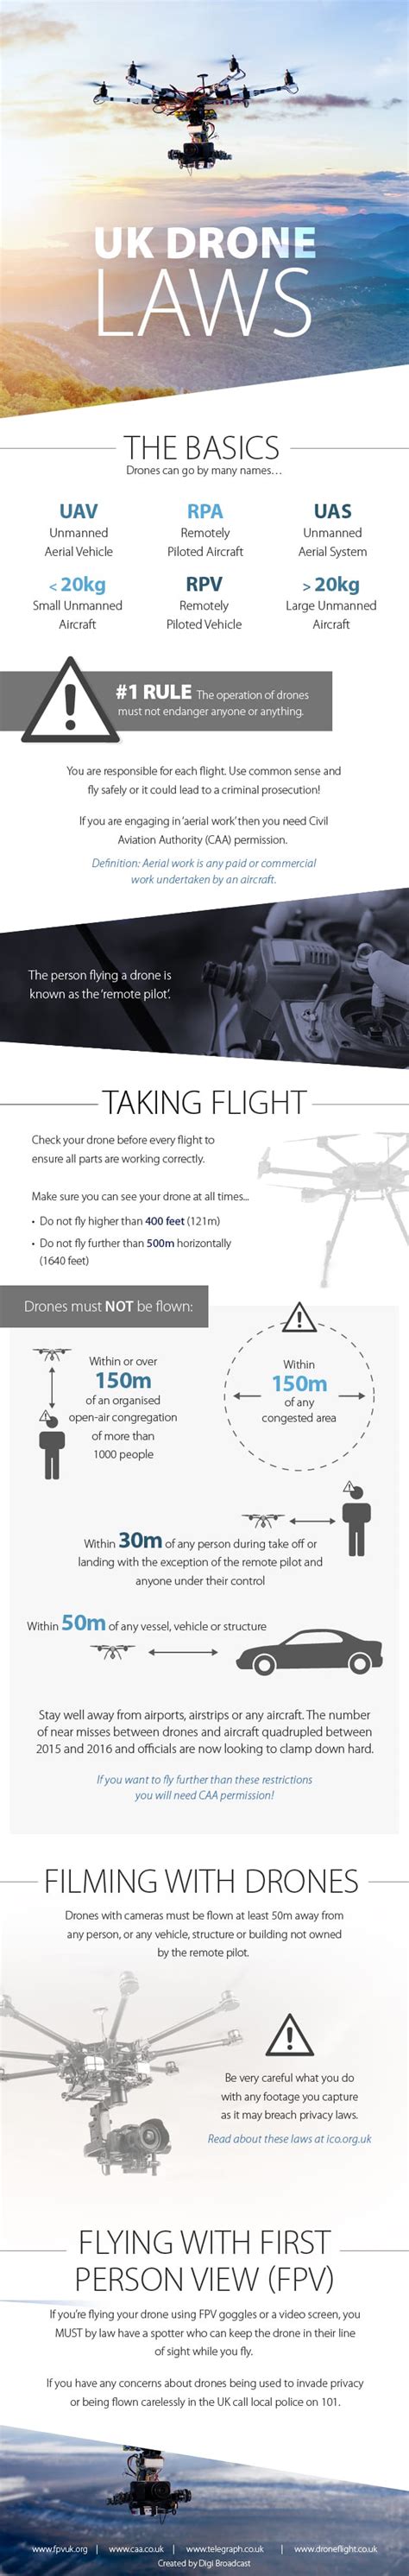 uk drone laws infographic digibroadcast